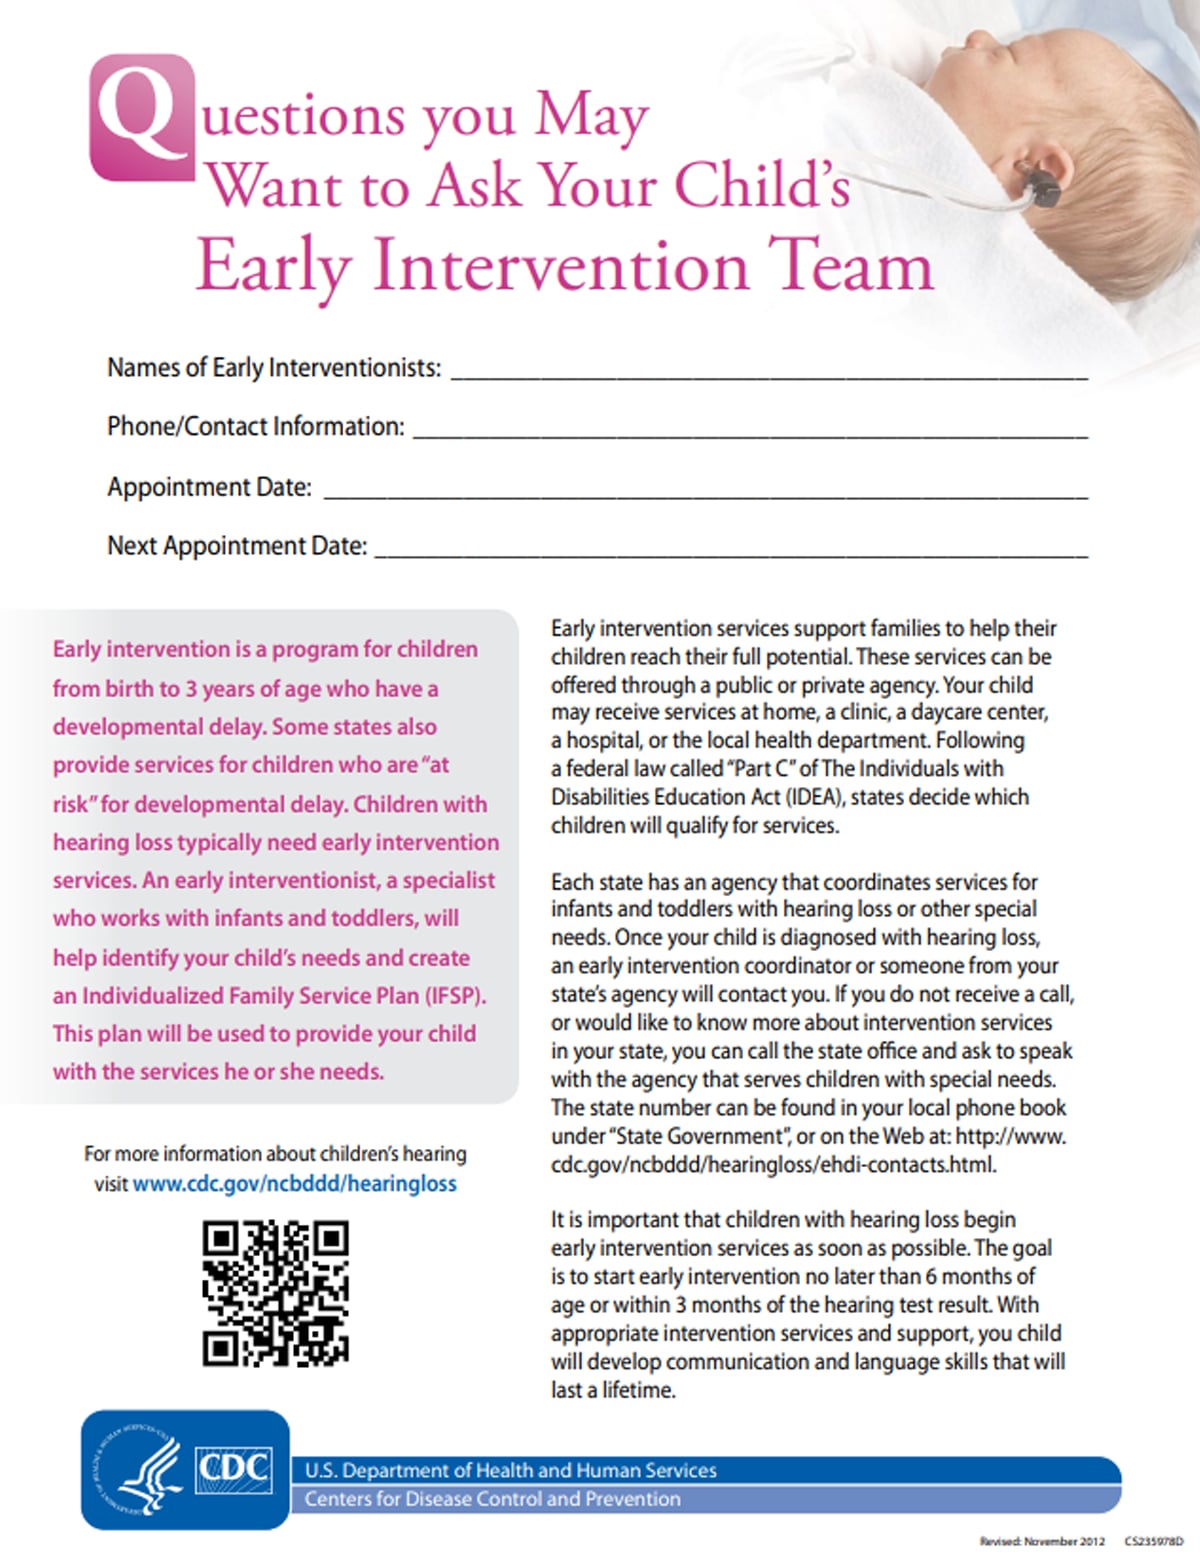 PDF preview - Questions you May want to ask your child's early intervention